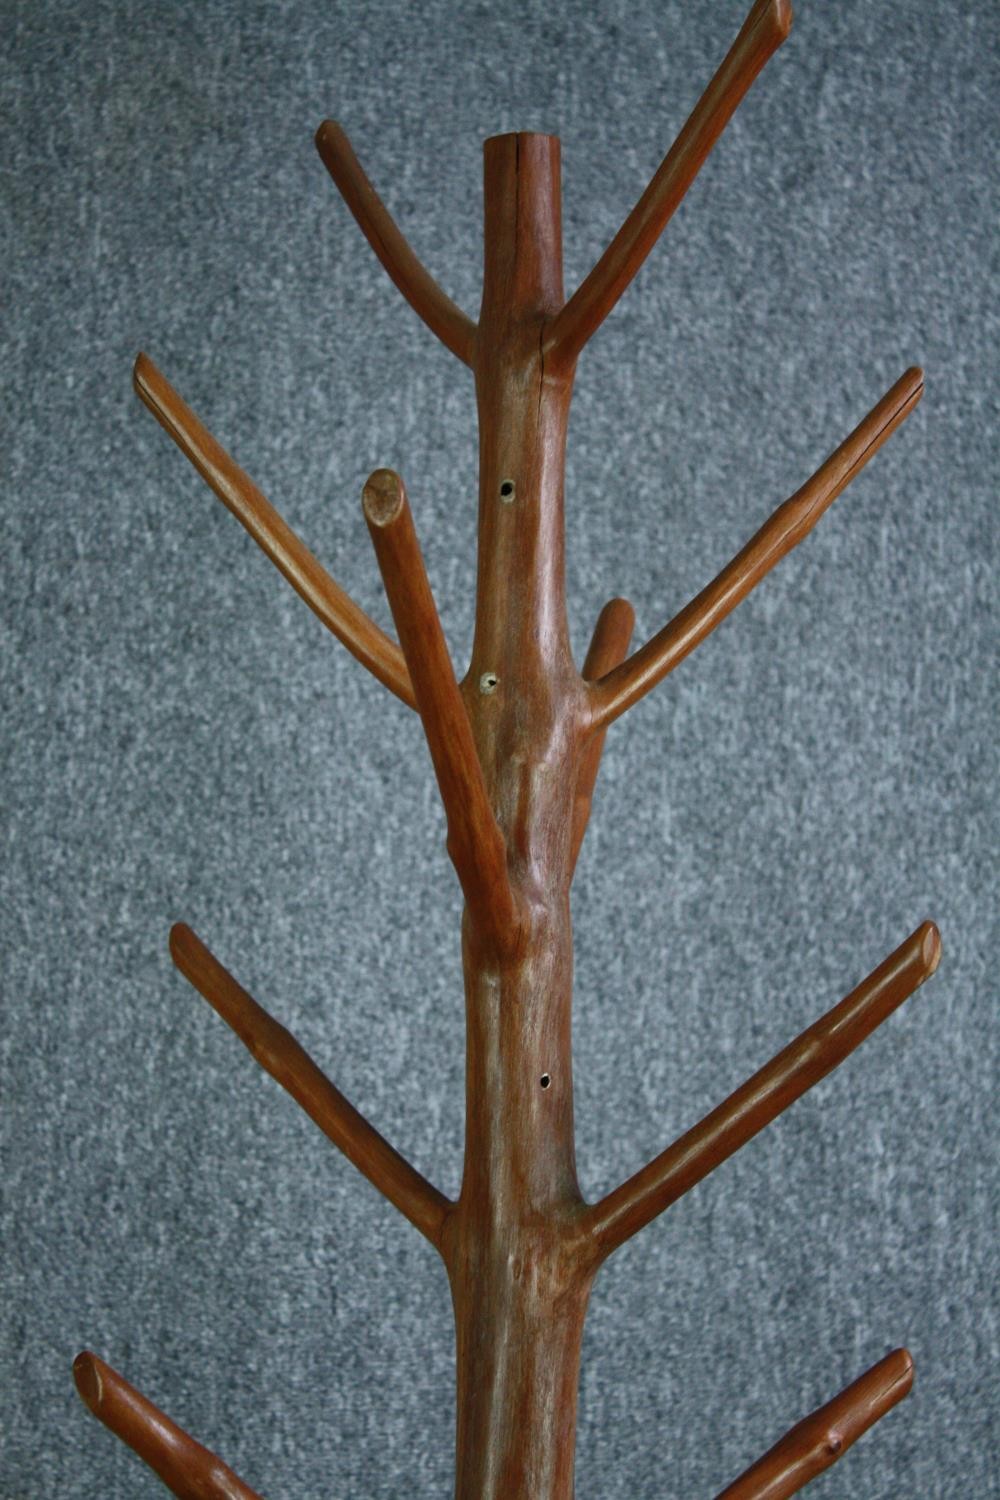 A hall coat and hatstand cut from a hardwood branch. Lacquered finish. H.205cm. - Image 2 of 4